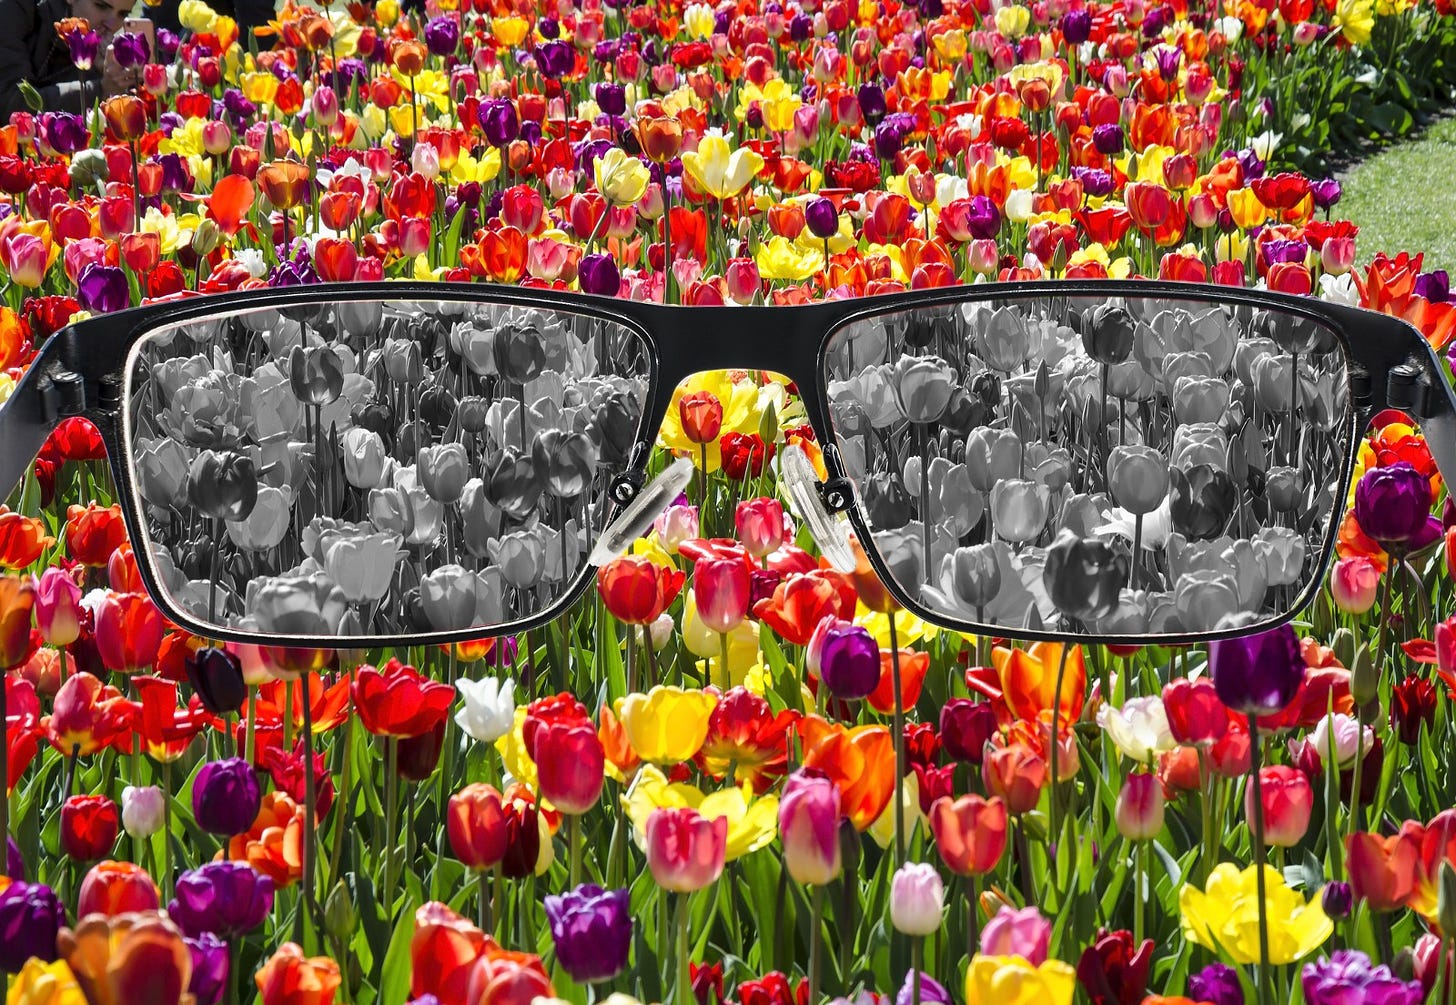 Glasses that turn colorful tulips into black-and-white. A commentary on perception.